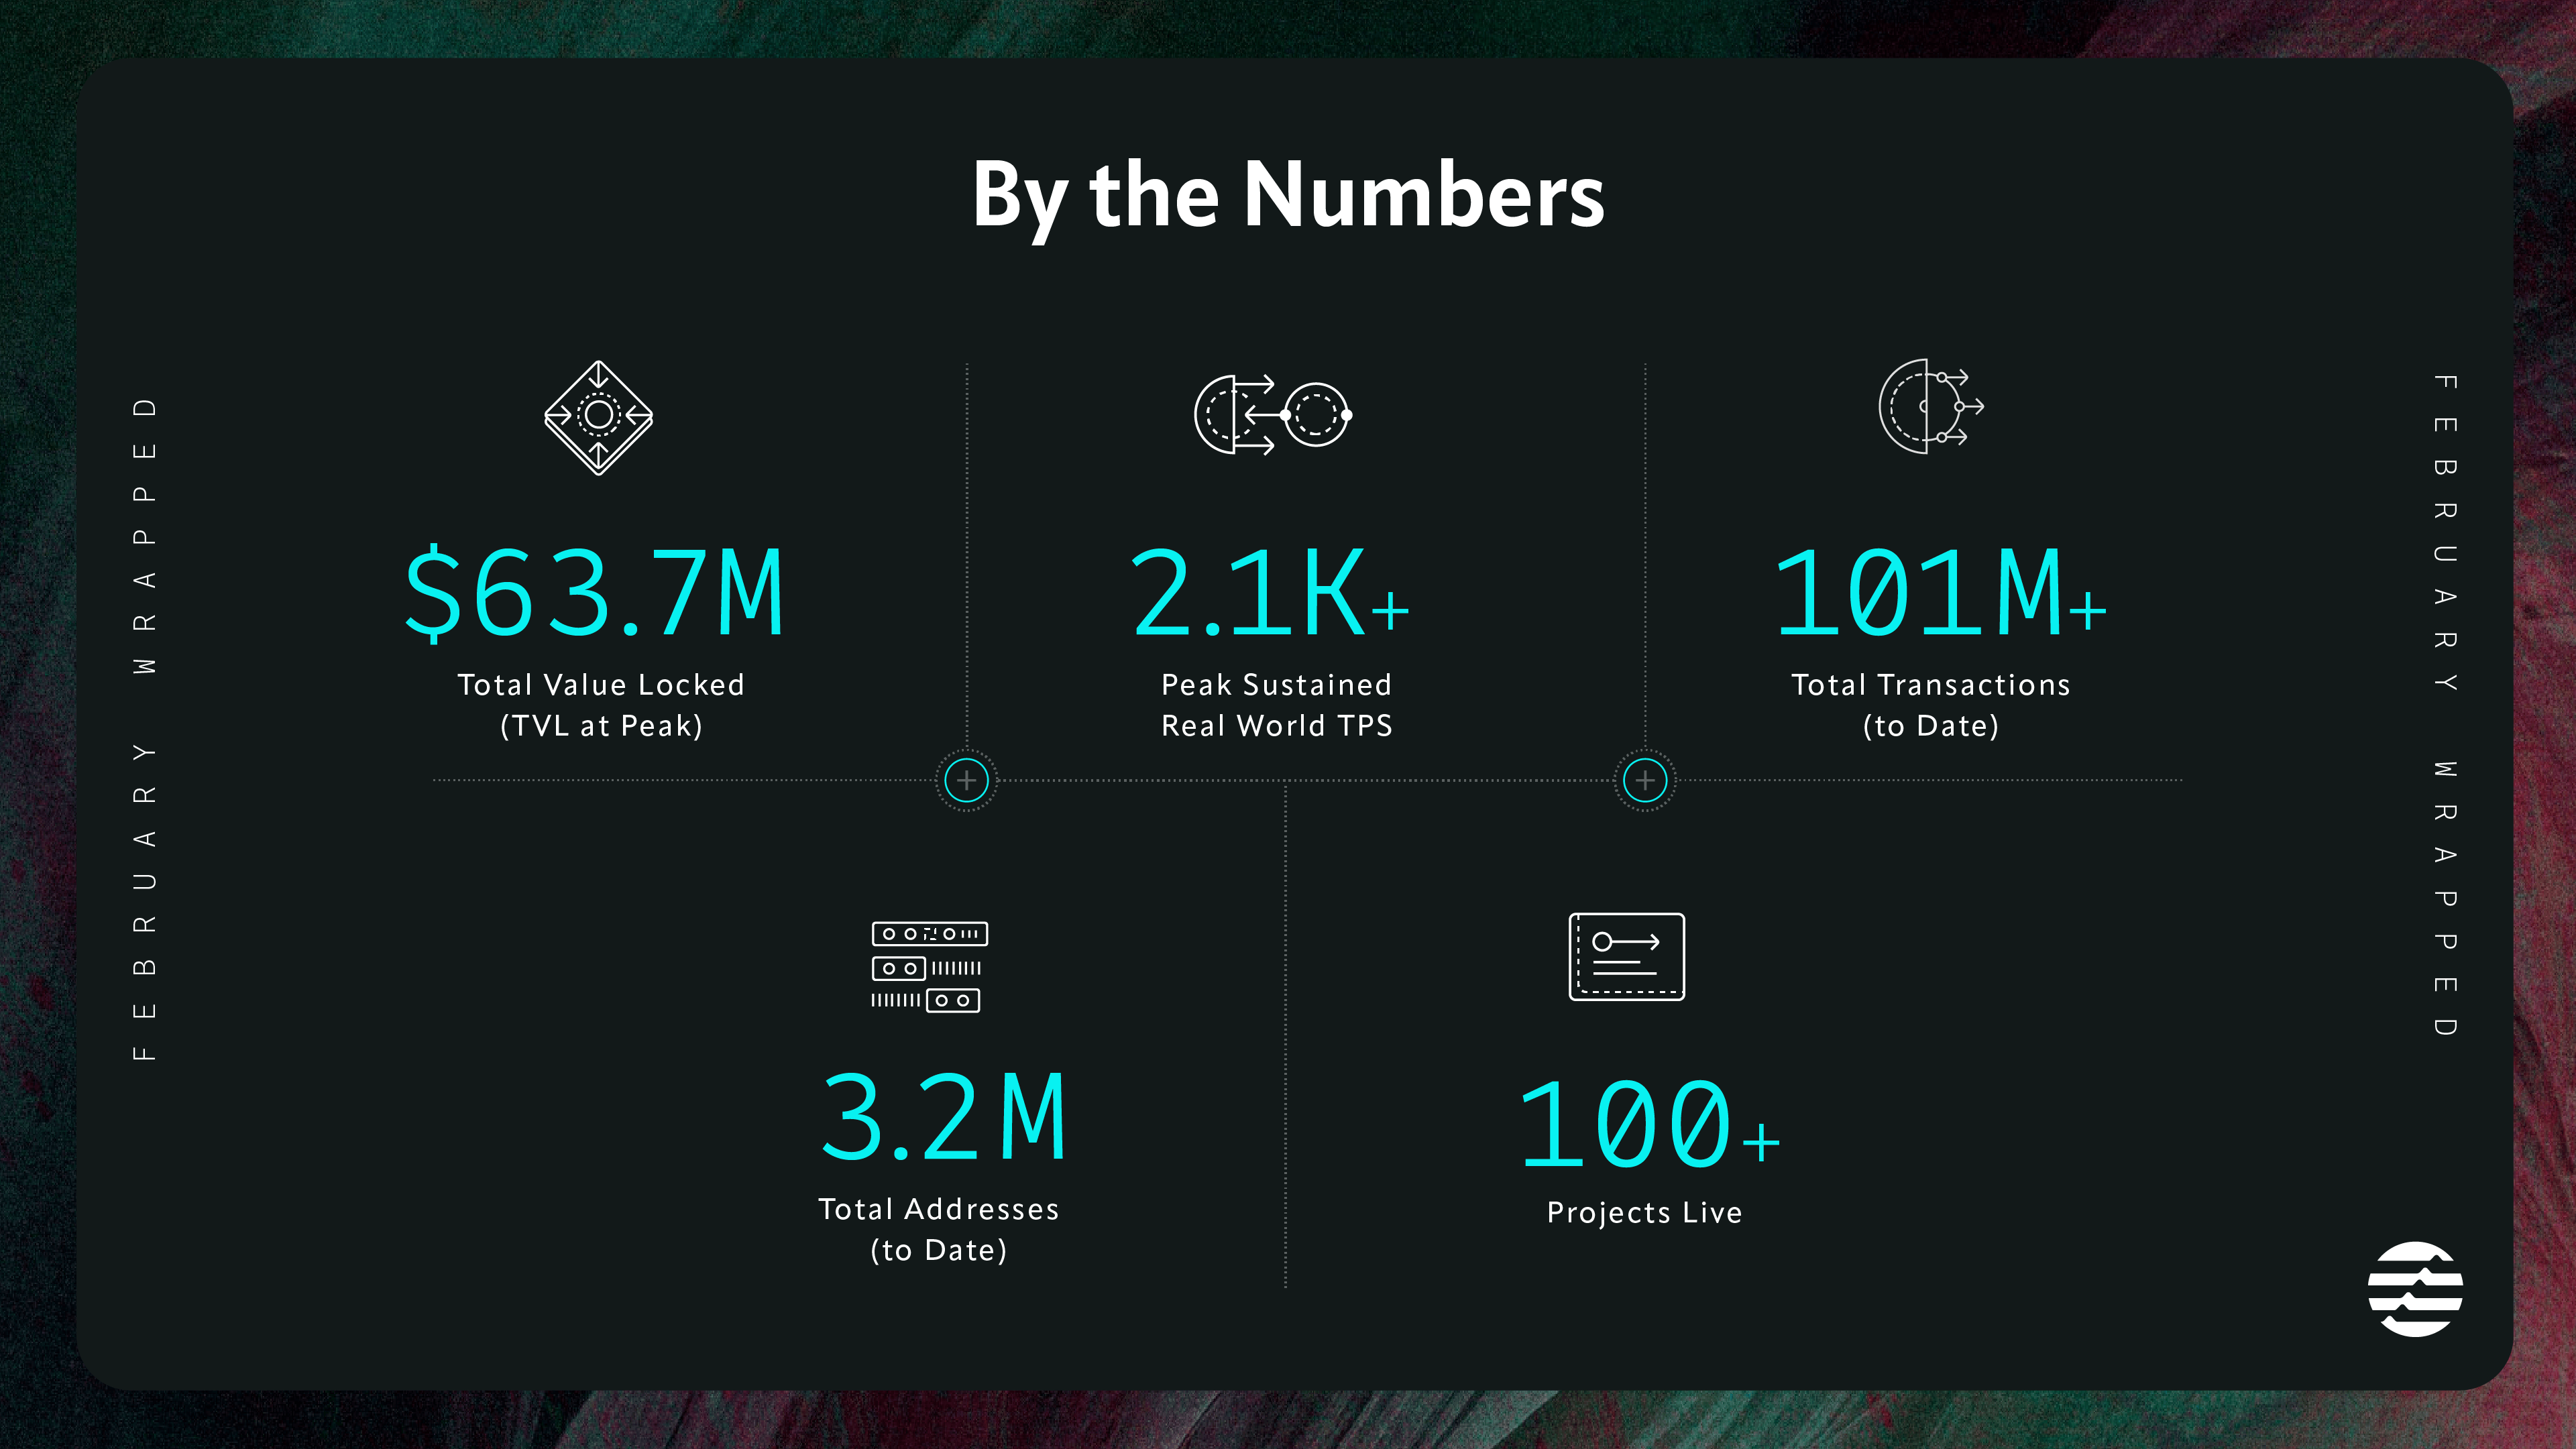 63.7m Total Value Locked, 2.1k+ Peak Sustained Real World TPS, 101M+ Total Transactions (to Date), 3.2M Total Addresses (to Date), 100+ Projects Live